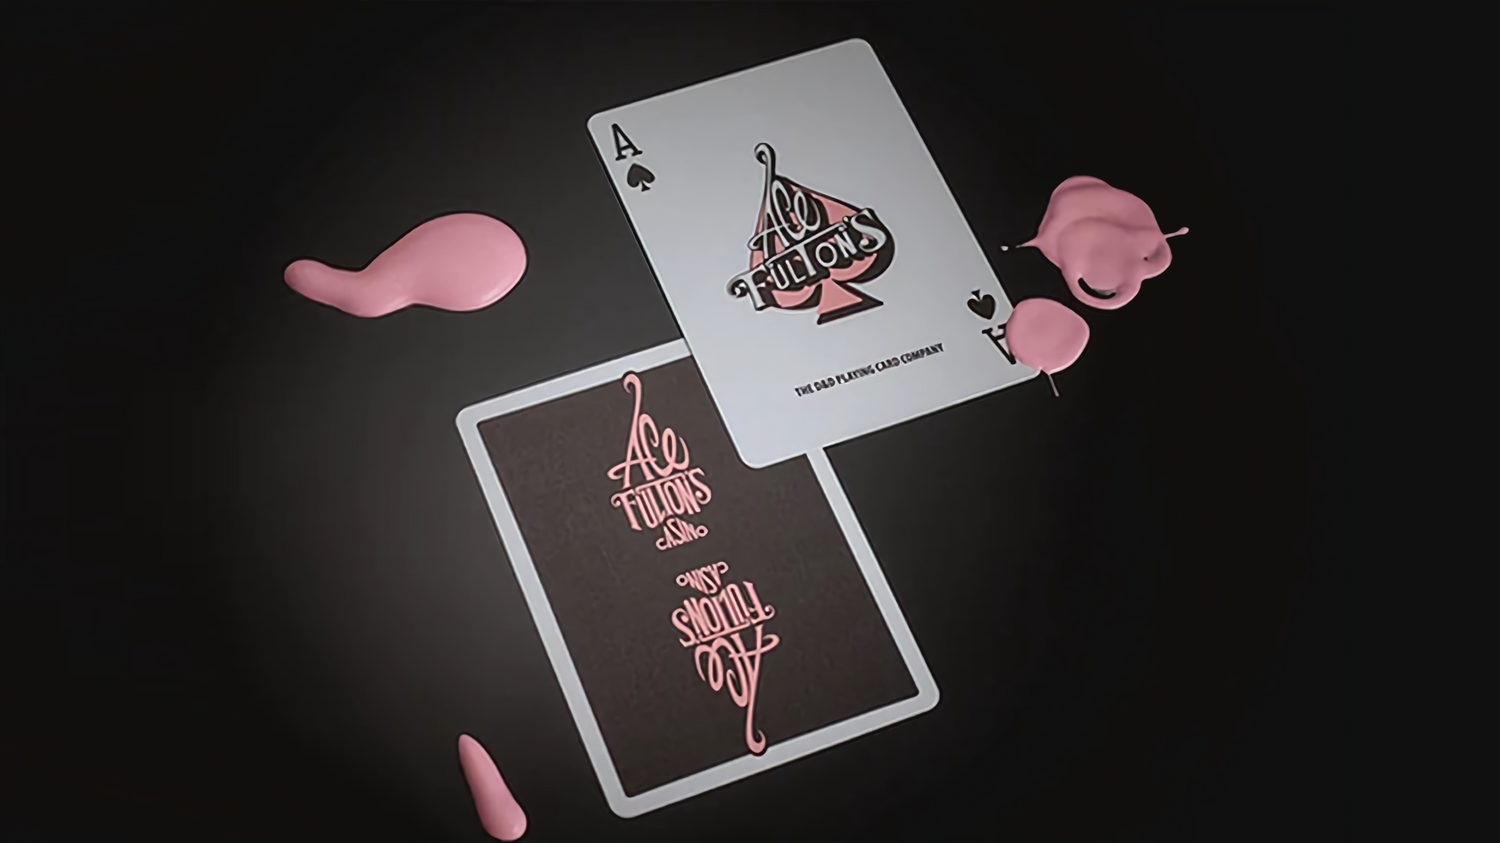 Ace Fulton's Casino Femme Fatale by Fulton's : Playing Cards, Poker, Magic, Cardistry, Singapore